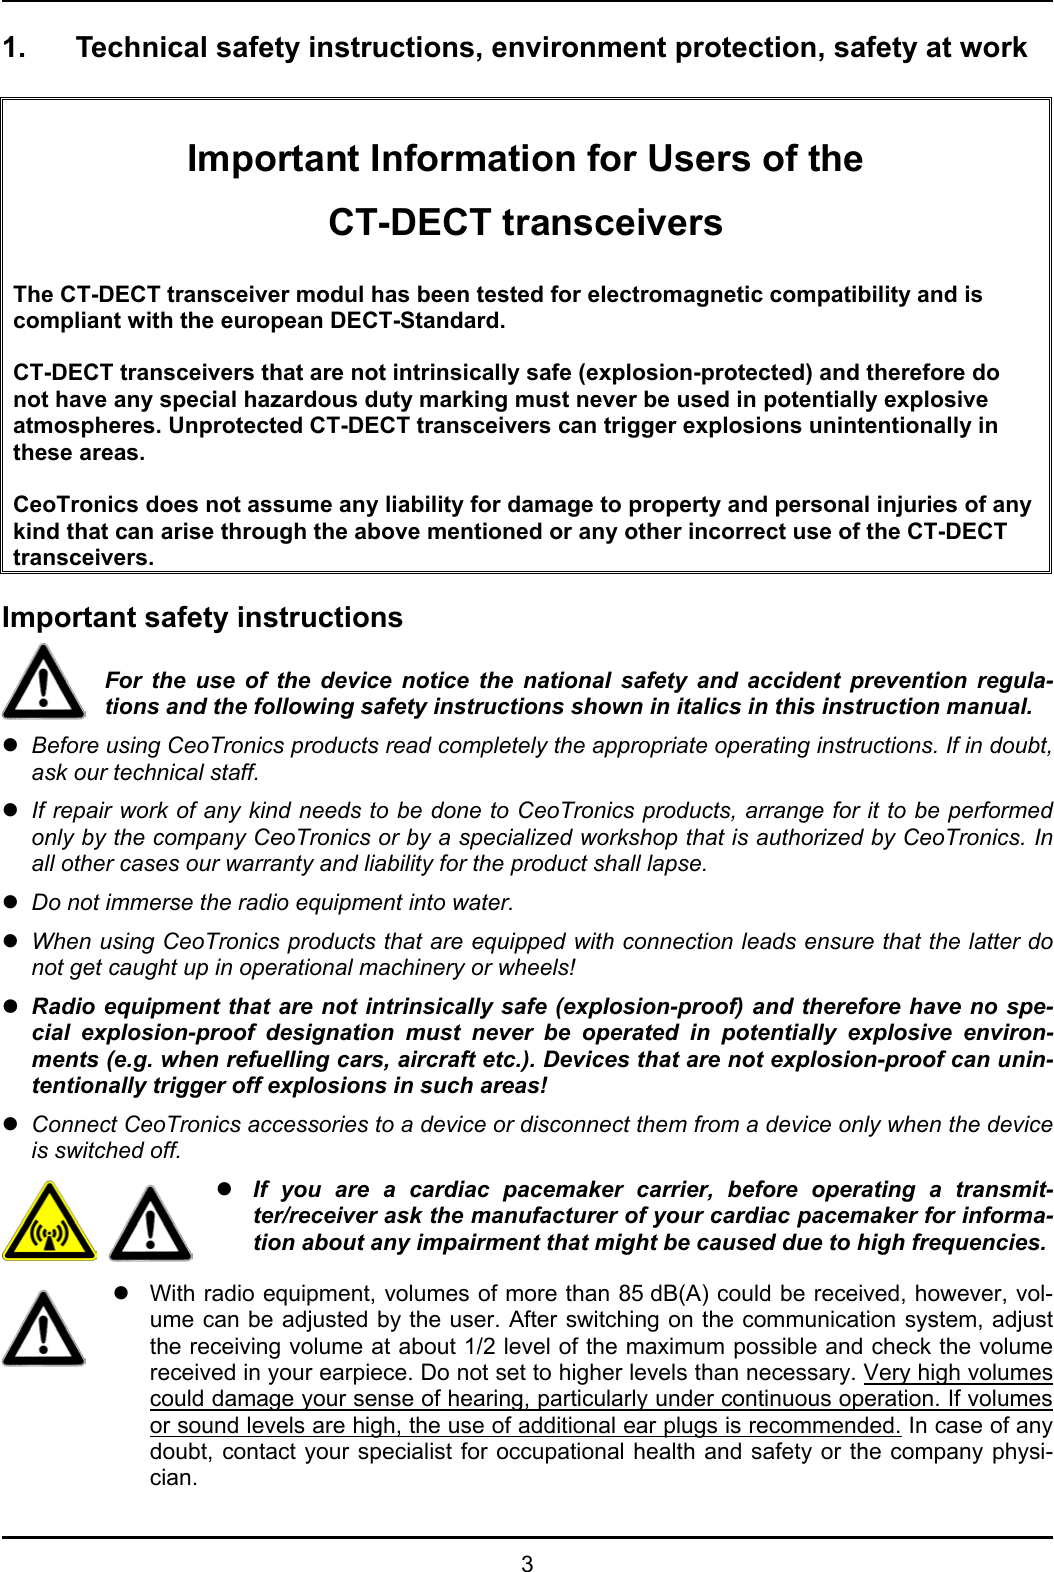   3 1.  Technical safety instructions, environment protection, safety at work    Important Information for Users of the CT-DECT transceivers  The CT-DECT transceiver modul has been tested for electromagnetic compatibility and is compliant with the european DECT-Standard.   CT-DECT transceivers that are not intrinsically safe (explosion-protected) and therefore do not have any special hazardous duty marking must never be used in potentially explosive atmospheres. Unprotected CT-DECT transceivers can trigger explosions unintentionally in these areas.  CeoTronics does not assume any liability for damage to property and personal injuries of any kind that can arise through the above mentioned or any other incorrect use of the CT-DECT transceivers.  Important safety instructions  For the use of the device notice the national safety and accident prevention regula-tions and the following safety instructions shown in italics in this instruction manual. z Before using CeoTronics products read completely the appropriate operating instructions. If in doubt, ask our technical staff. z If repair work of any kind needs to be done to CeoTronics products, arrange for it to be performed only by the company CeoTronics or by a specialized workshop that is authorized by CeoTronics. In all other cases our warranty and liability for the product shall lapse. z Do not immerse the radio equipment into water. z When using CeoTronics products that are equipped with connection leads ensure that the latter do not get caught up in operational machinery or wheels! z Radio equipment that are not intrinsically safe (explosion-proof) and therefore have no spe-cial explosion-proof designation must never be operated in potentially explosive environ-ments (e.g. when refuelling cars, aircraft etc.). Devices that are not explosion-proof can unin-tentionally trigger off explosions in such areas! z Connect CeoTronics accessories to a device or disconnect them from a device only when the device is switched off.   z If you are a cardiac pacemaker carrier, before operating a transmit-ter/receiver ask the manufacturer of your cardiac pacemaker for informa-tion about any impairment that might be caused due to high frequencies.  z  With radio equipment, volumes of more than 85 dB(A) could be received, however, vol-ume can be adjusted by the user. After switching on the communication system, adjust the receiving volume at about 1/2 level of the maximum possible and check the volume received in your earpiece. Do not set to higher levels than necessary. Very high volumes could damage your sense of hearing, particularly under continuous operation. If volumes or sound levels are high, the use of additional ear plugs is recommended. In case of any doubt, contact your specialist for occupational health and safety or the company physi-cian. 